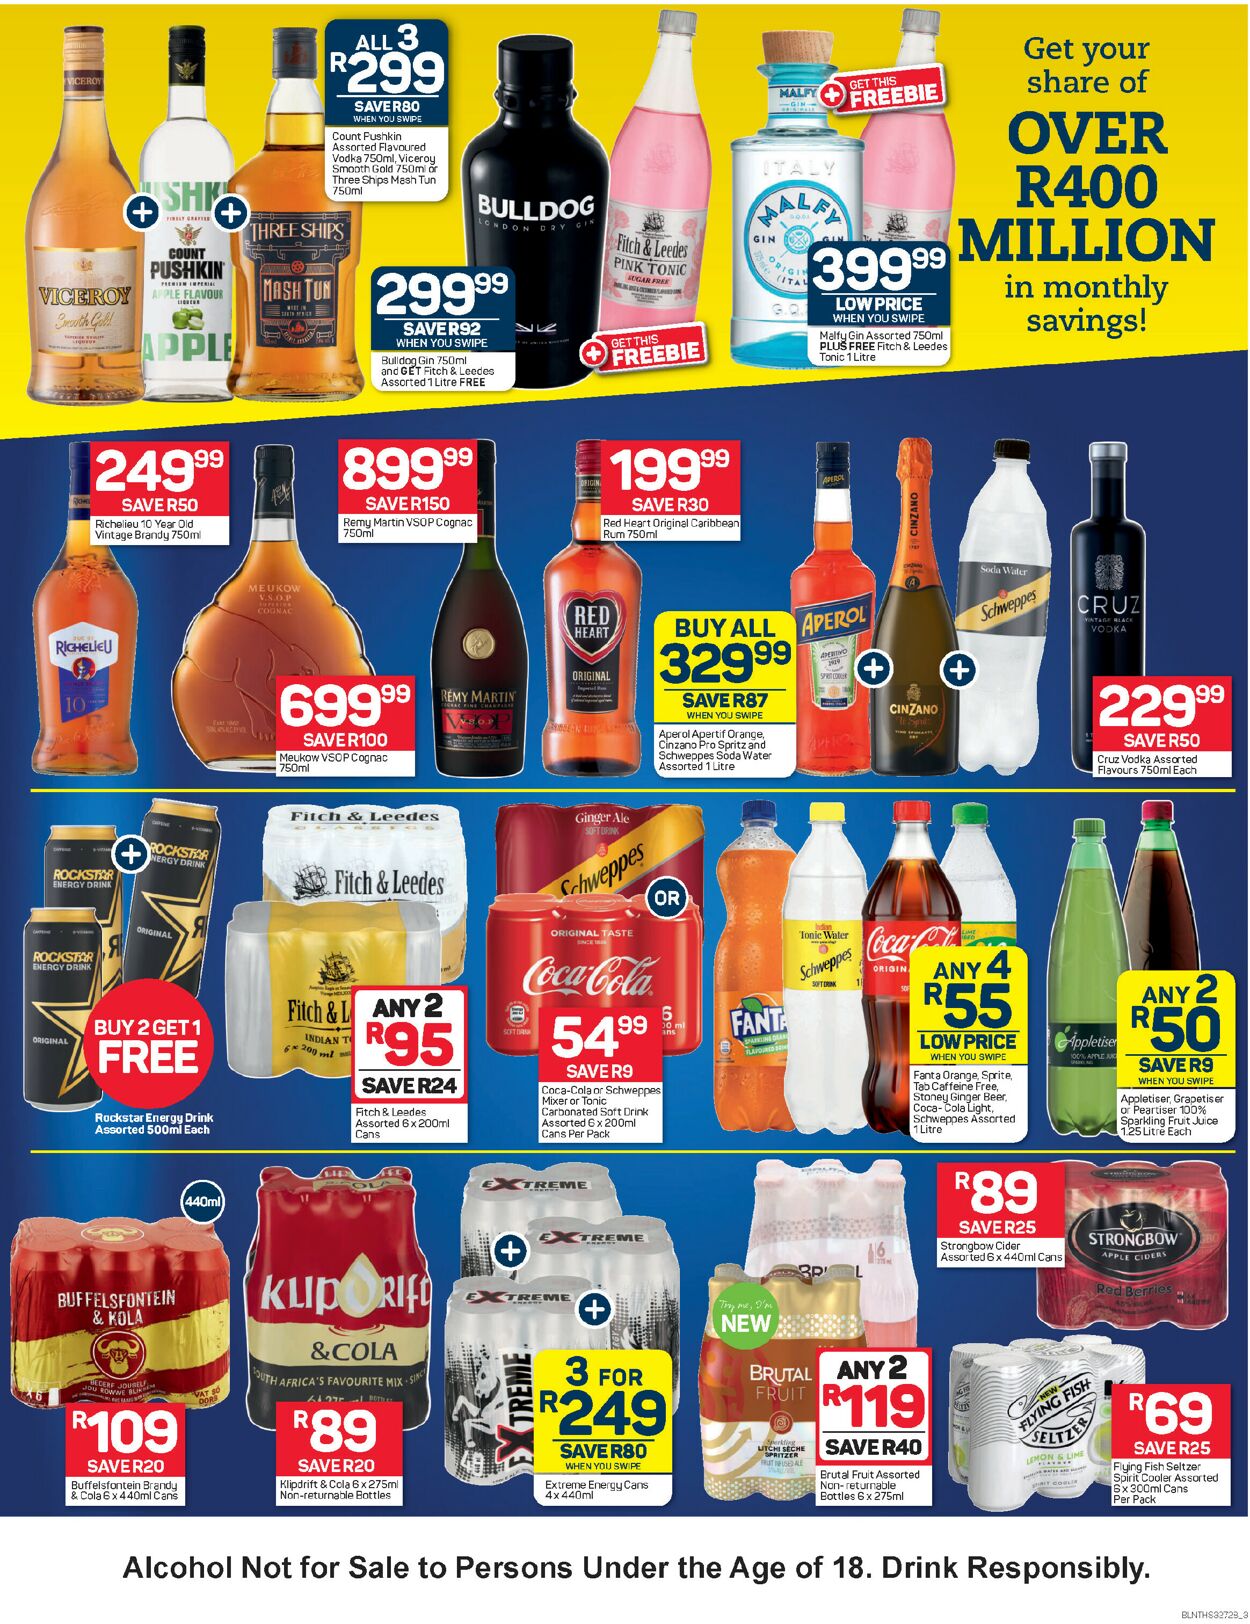 Pick n Pay Catalogue - 2023/04/24-2023/05/07 (Page 3)